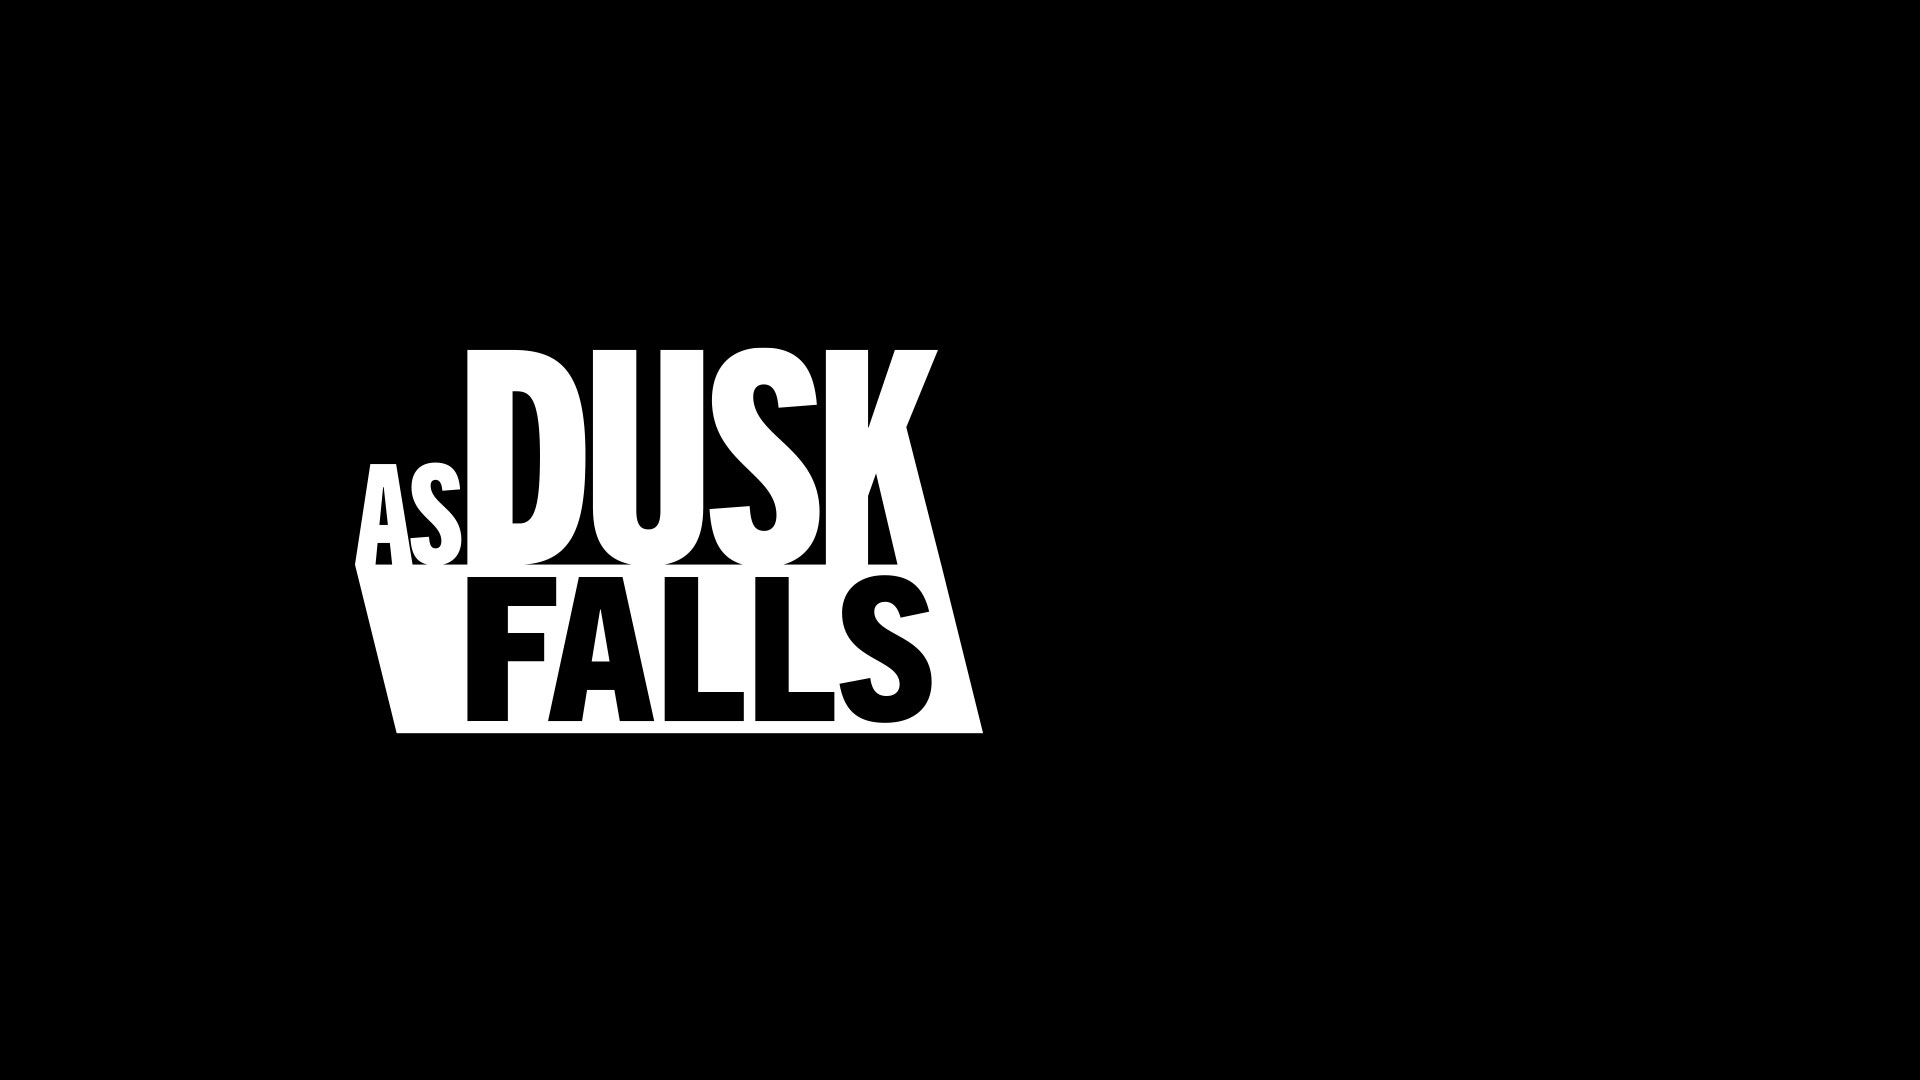 dusk xbox one release date